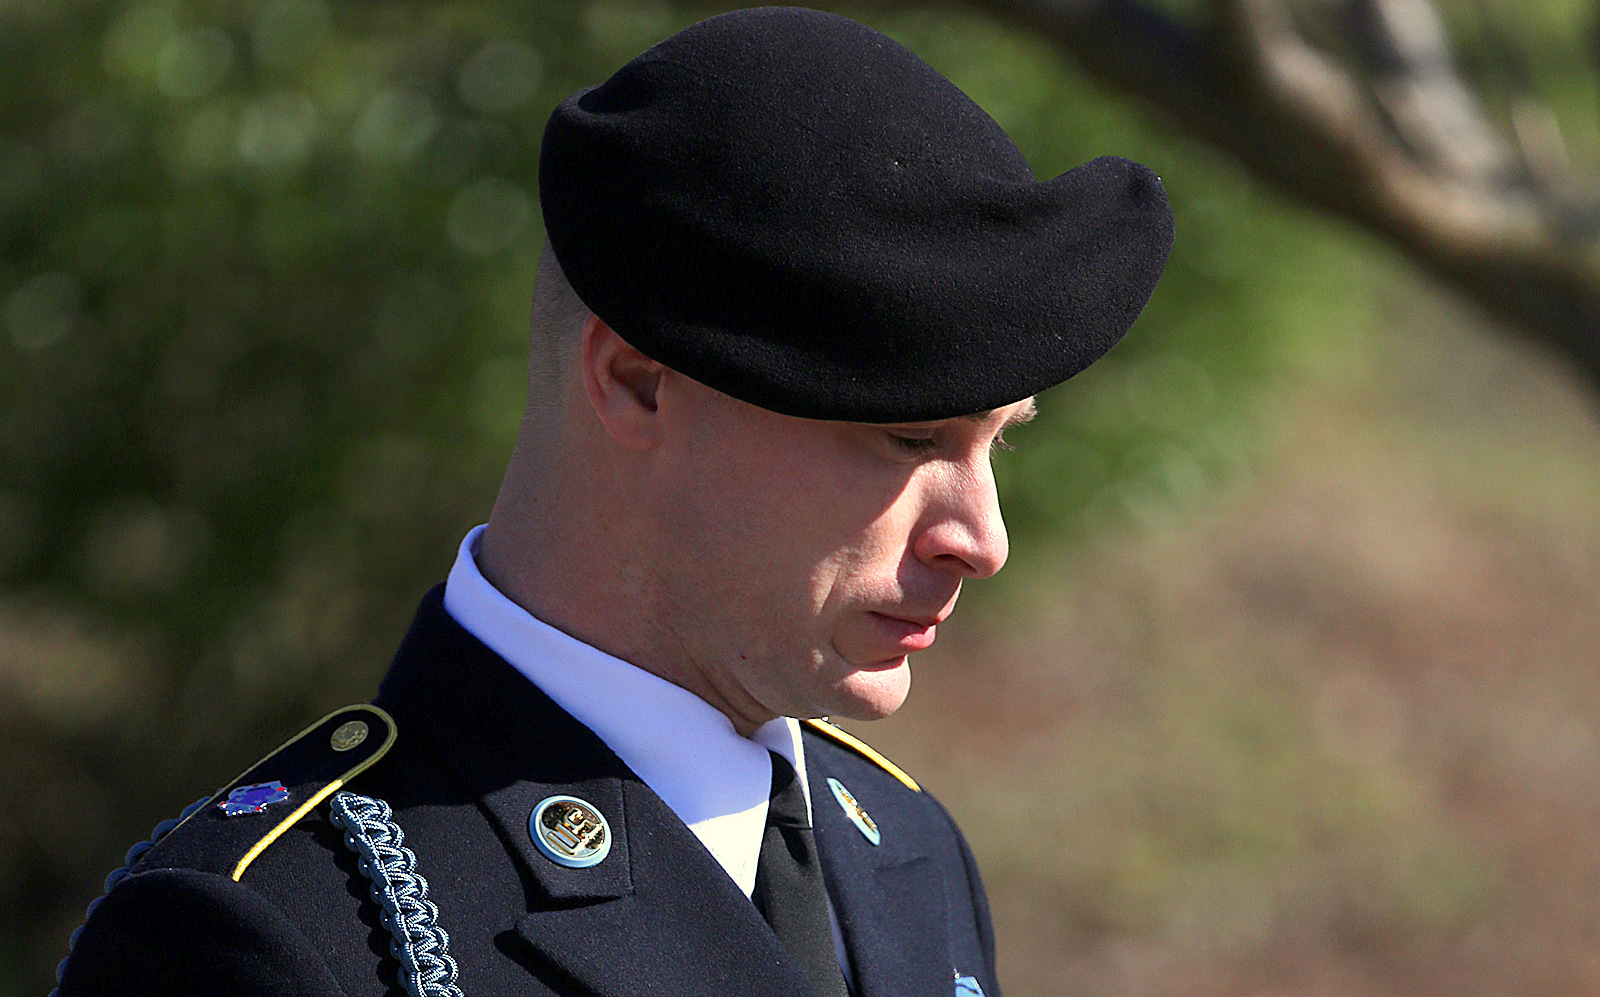 Army Sgt. Bowe Bergdahl exits a courthouse at Fort Bragg, N.C. after a pretrial hearing on Tuesday, Jan. 12, 2016. (AP Photo/Ted Richardson)